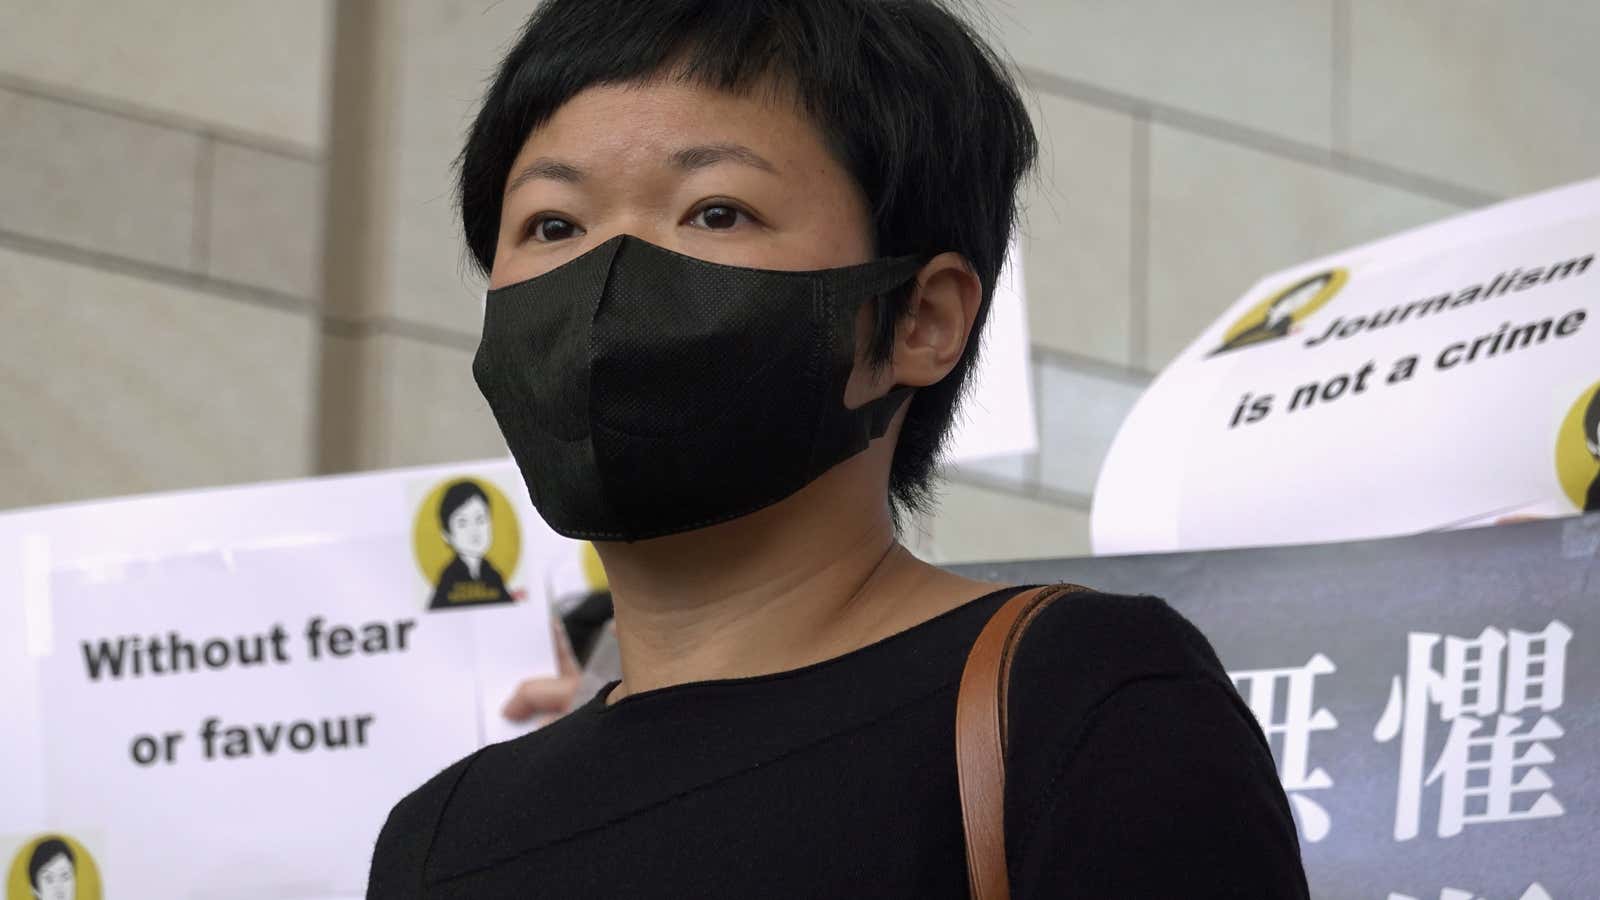 A Hong Kong investigative journalist was convicted for a public records search